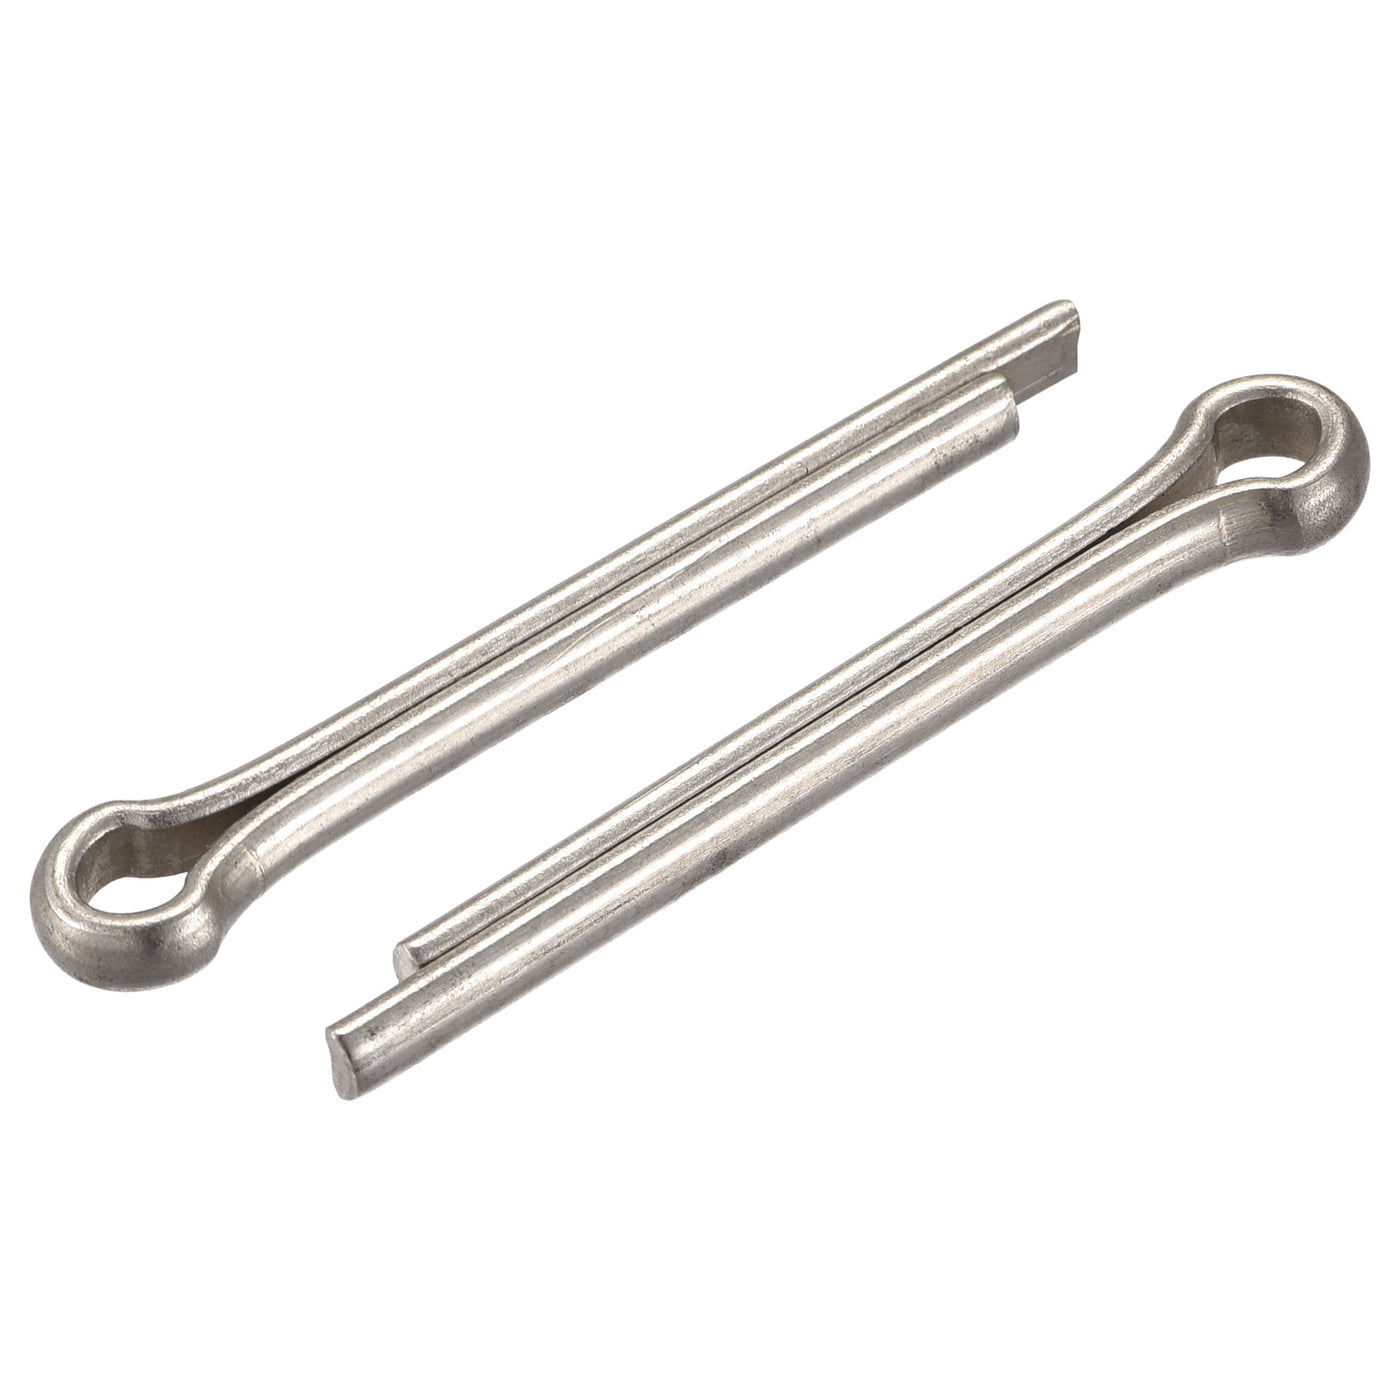 uxcell Uxcell Split Cotter Pin, 6mm x 43mm Stainless Steel Clip Fastener Fitting for Automotive, Mechanics, Silver Tone, 2Pcs